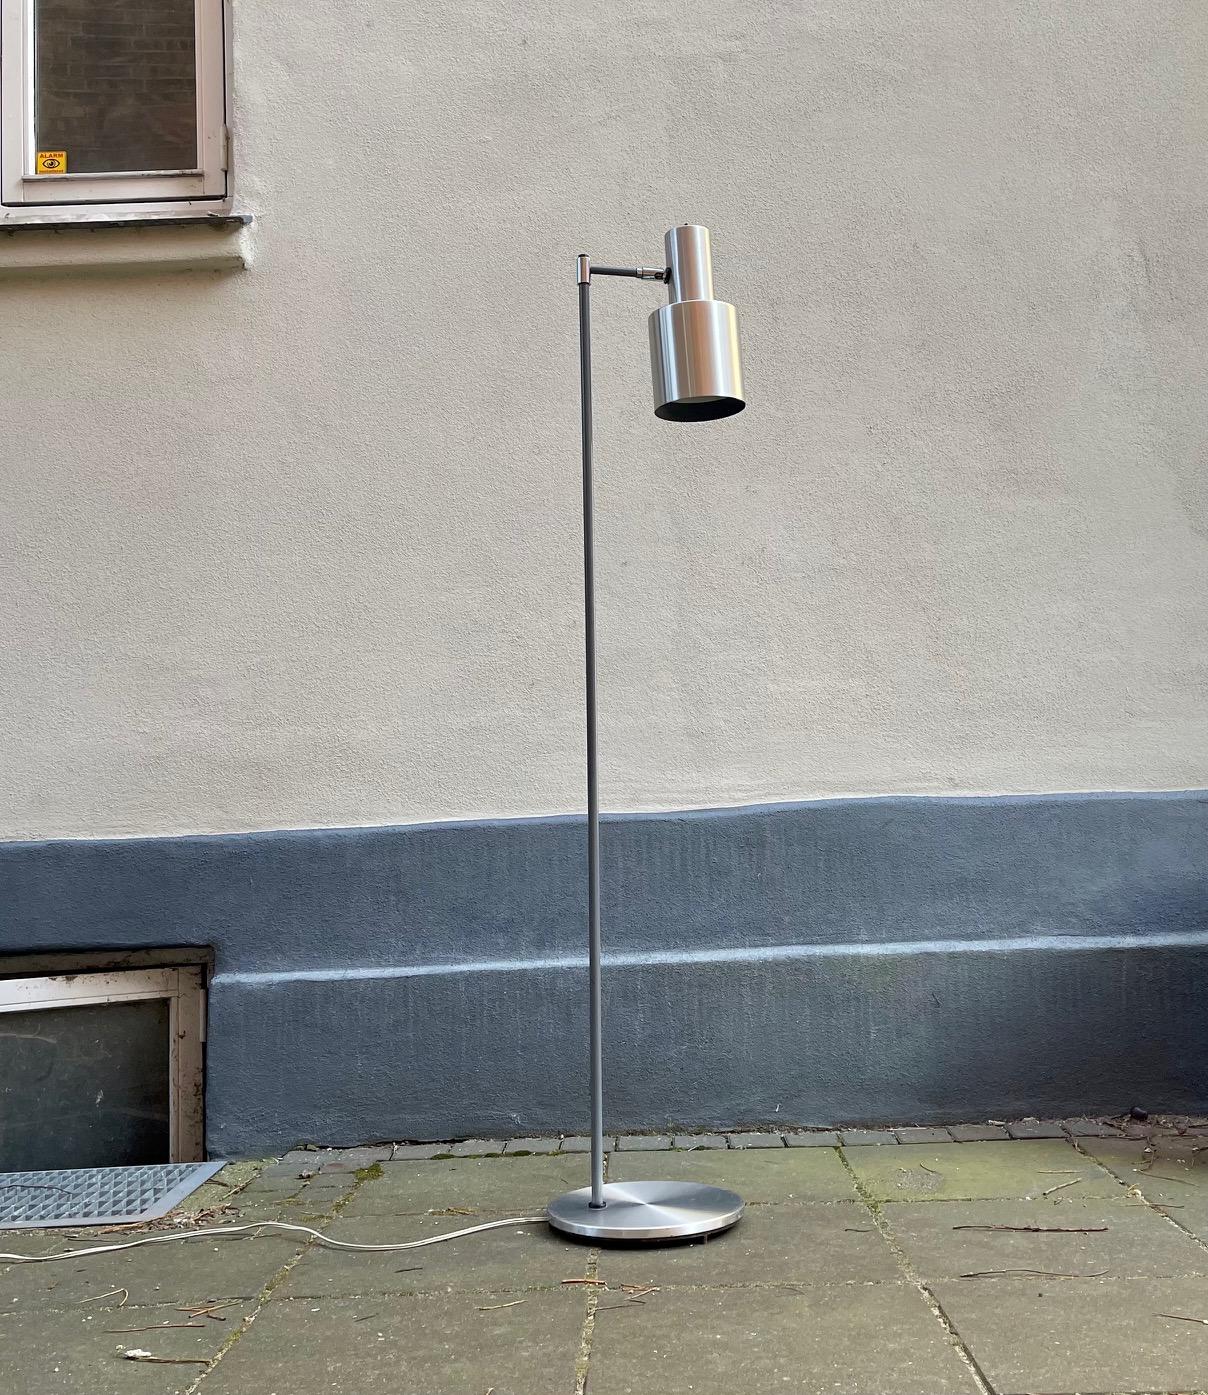 A stylish Scandinavian floor lamp with hidden cord and adjustable shade in brushed aluminum. Designed by Jo Hammerborg in 1963 and manufactured by Fog and Mørup in Denmark during the early 1970s. Measurements: H: 147 cm.

For the US. It will come